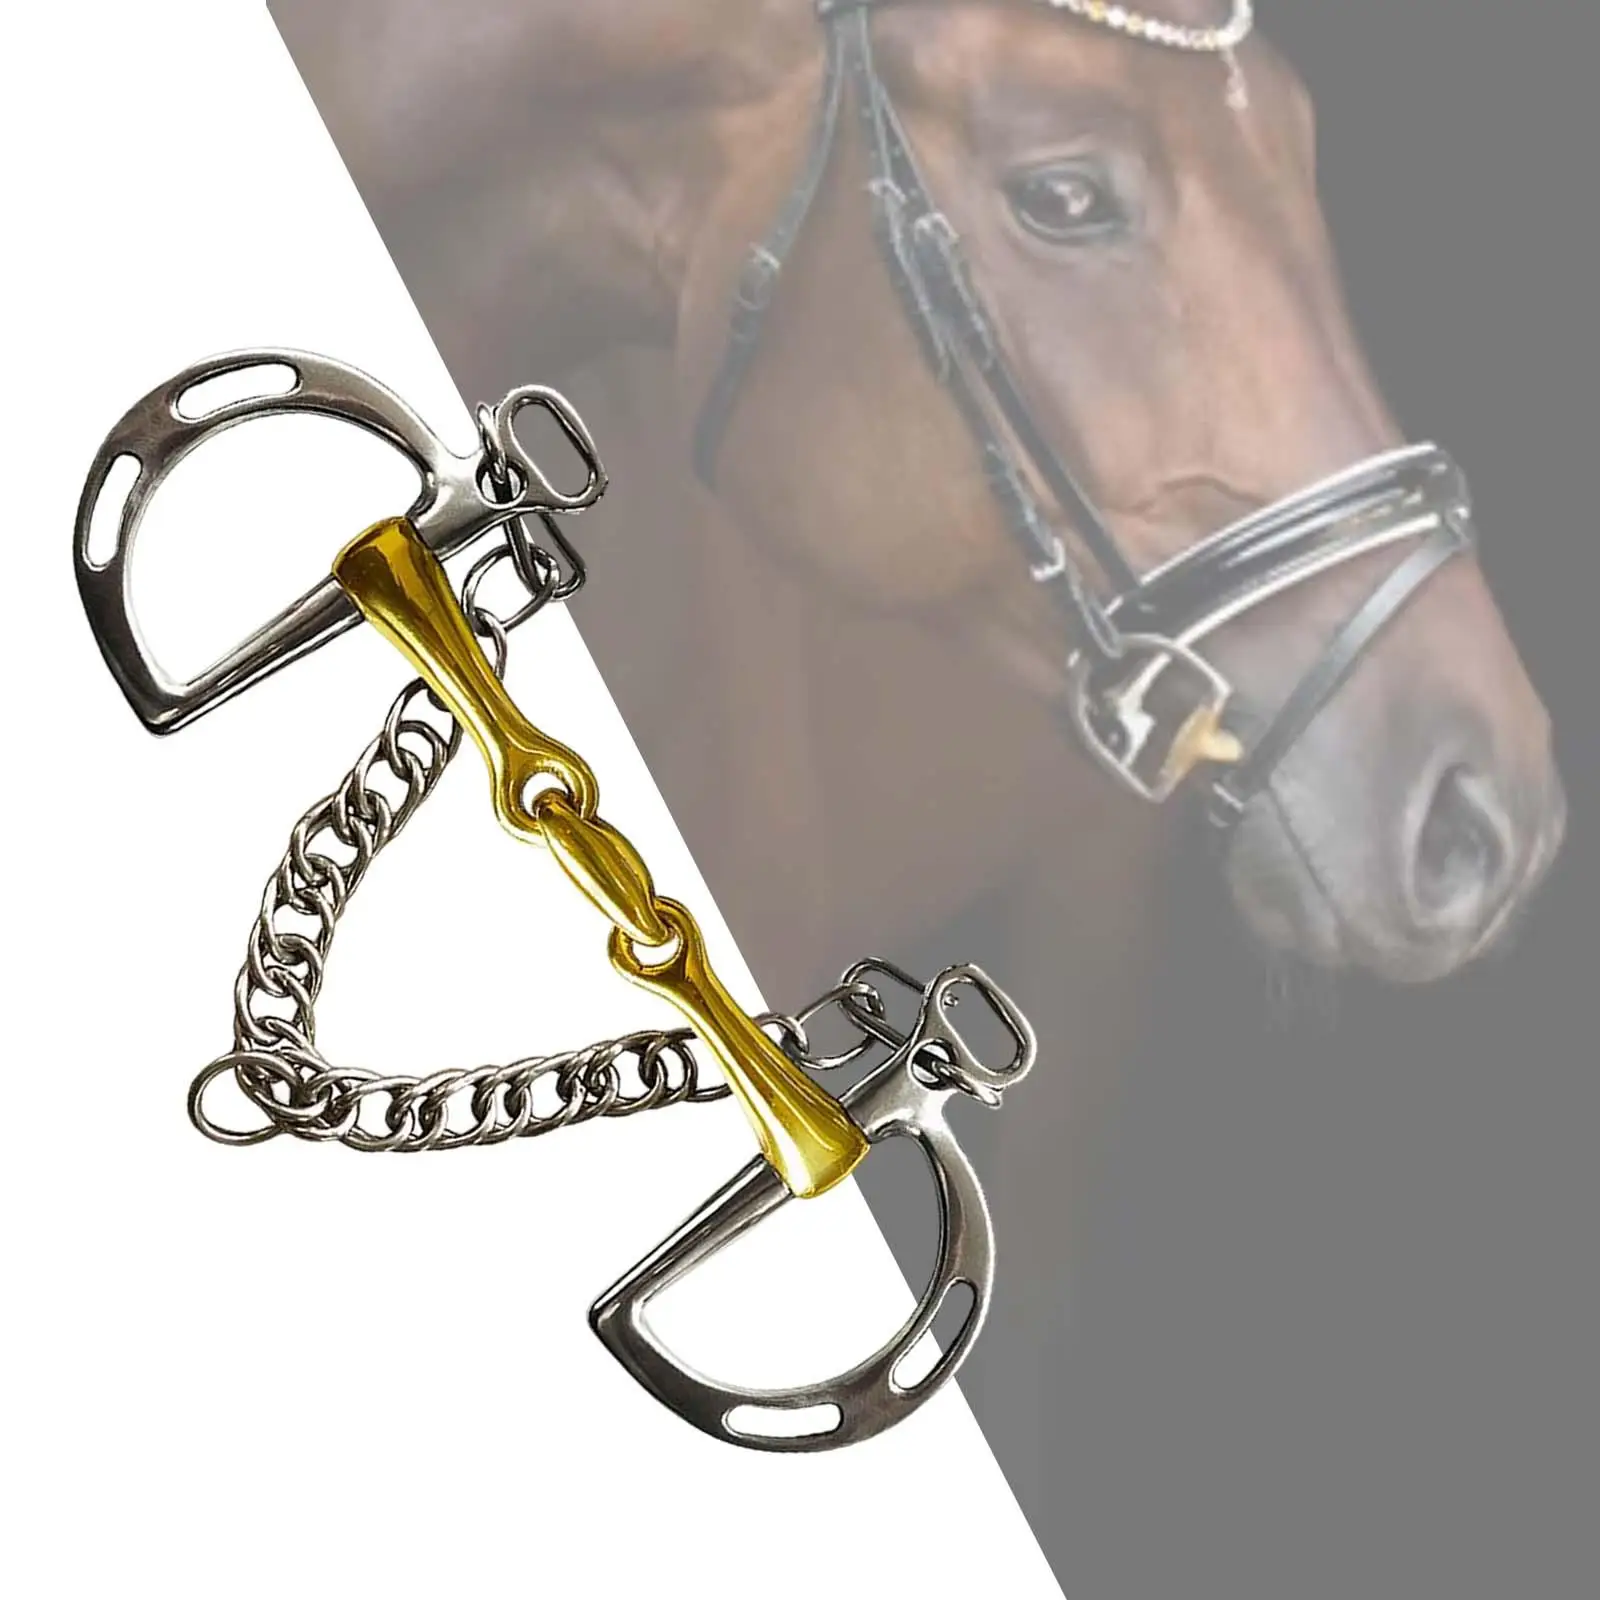 Horse Bit in Western Style Copper Mouth with Upper Hook Chain Cheek Riding